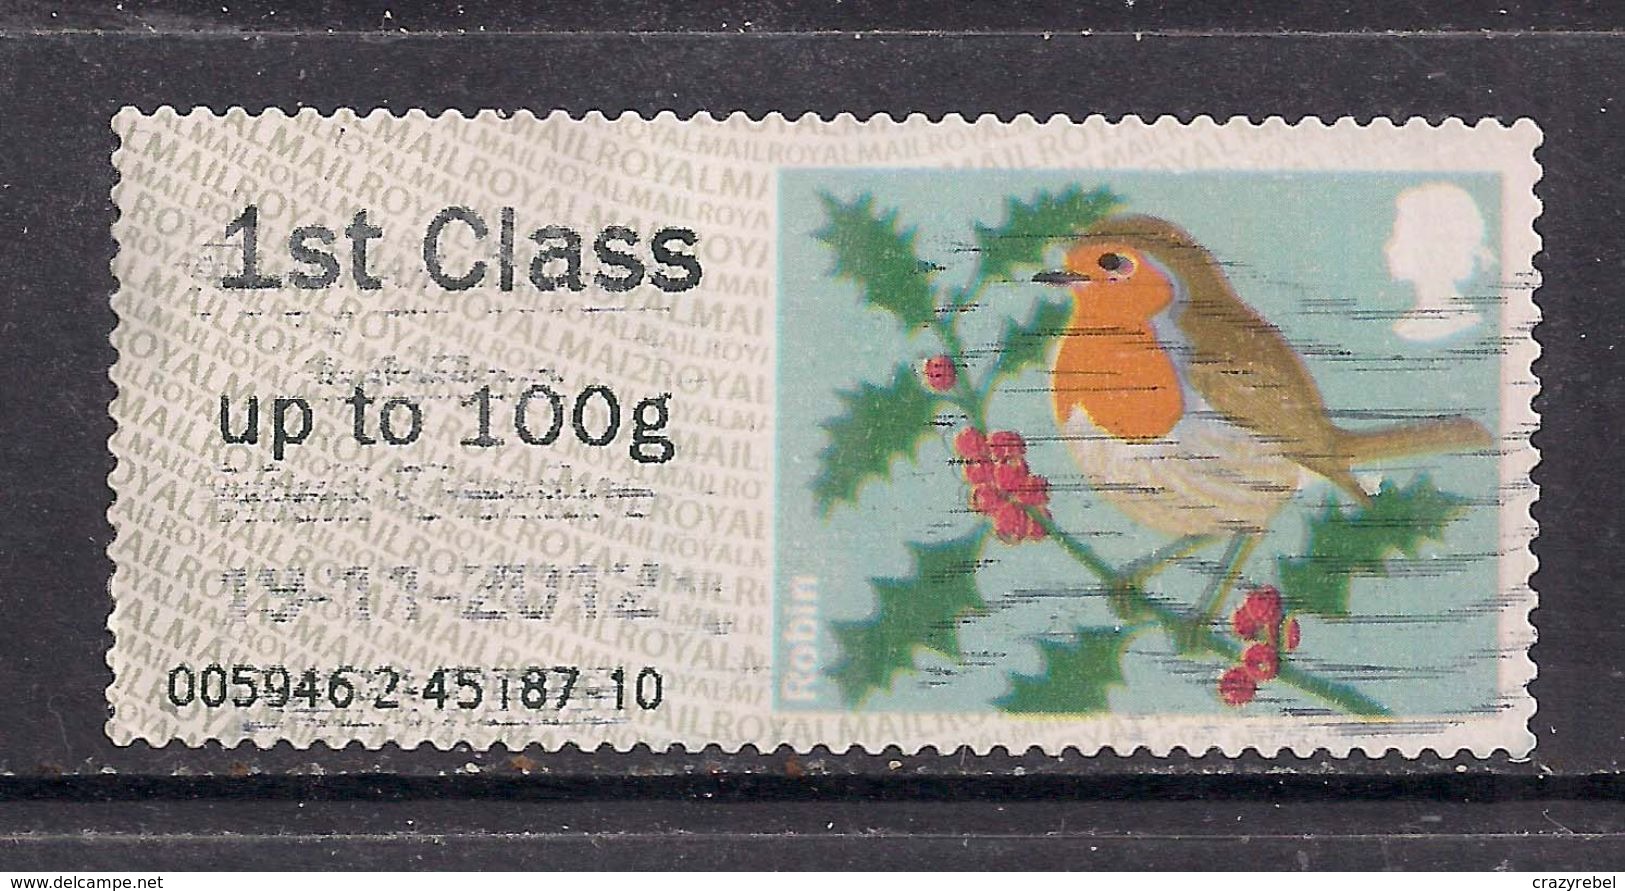 GB 2012 QE2 1st Up To 100 Gms Post & Go Christmas Robin ( T720 ) - Post & Go (distributeurs)